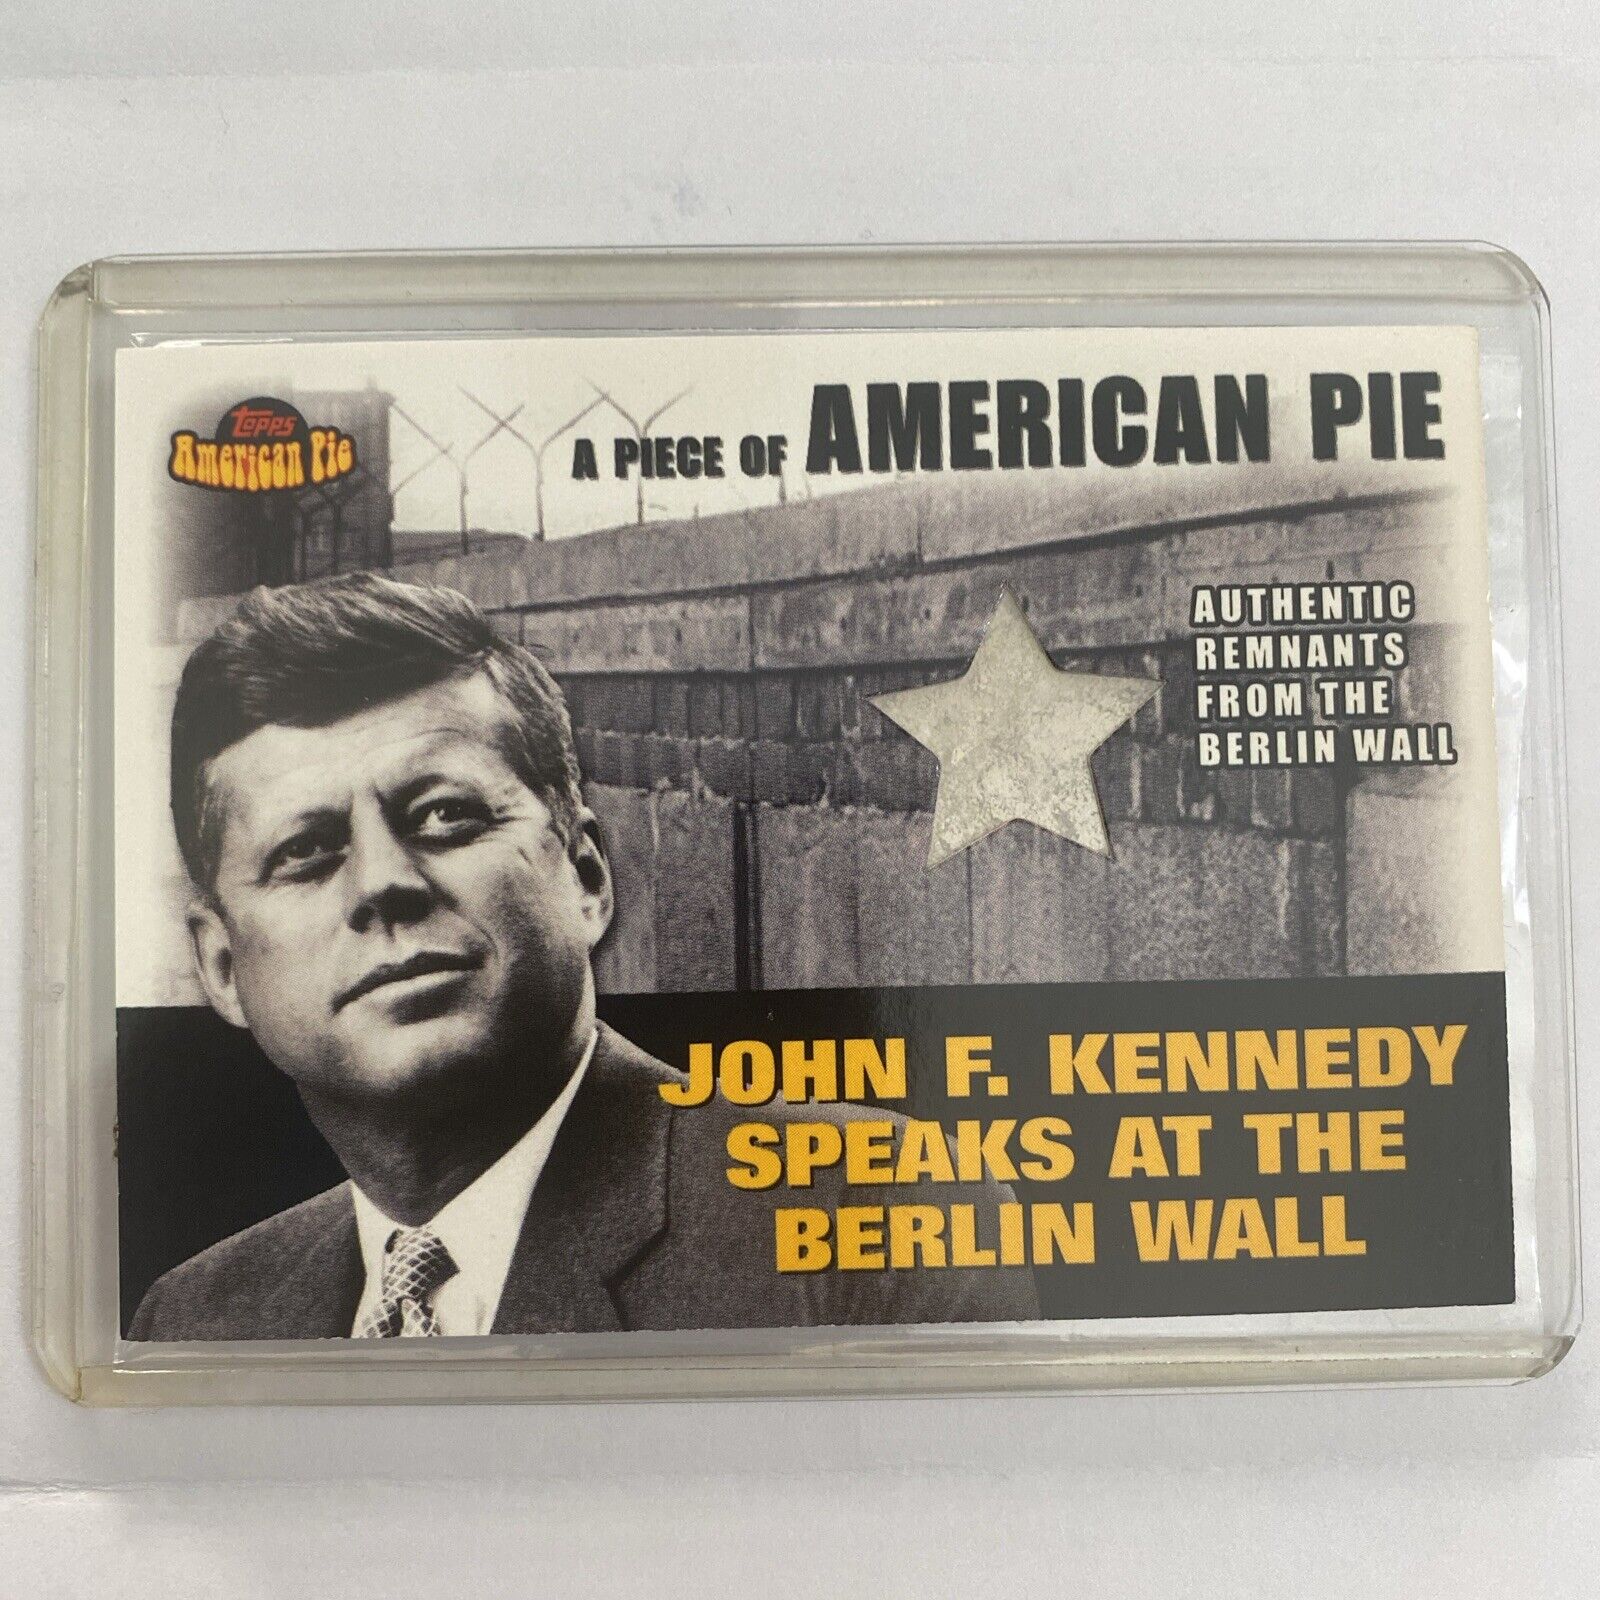 2001 Topps American Pie John F. Kennedy Speaks at the Berlin Wall Remnants Relic